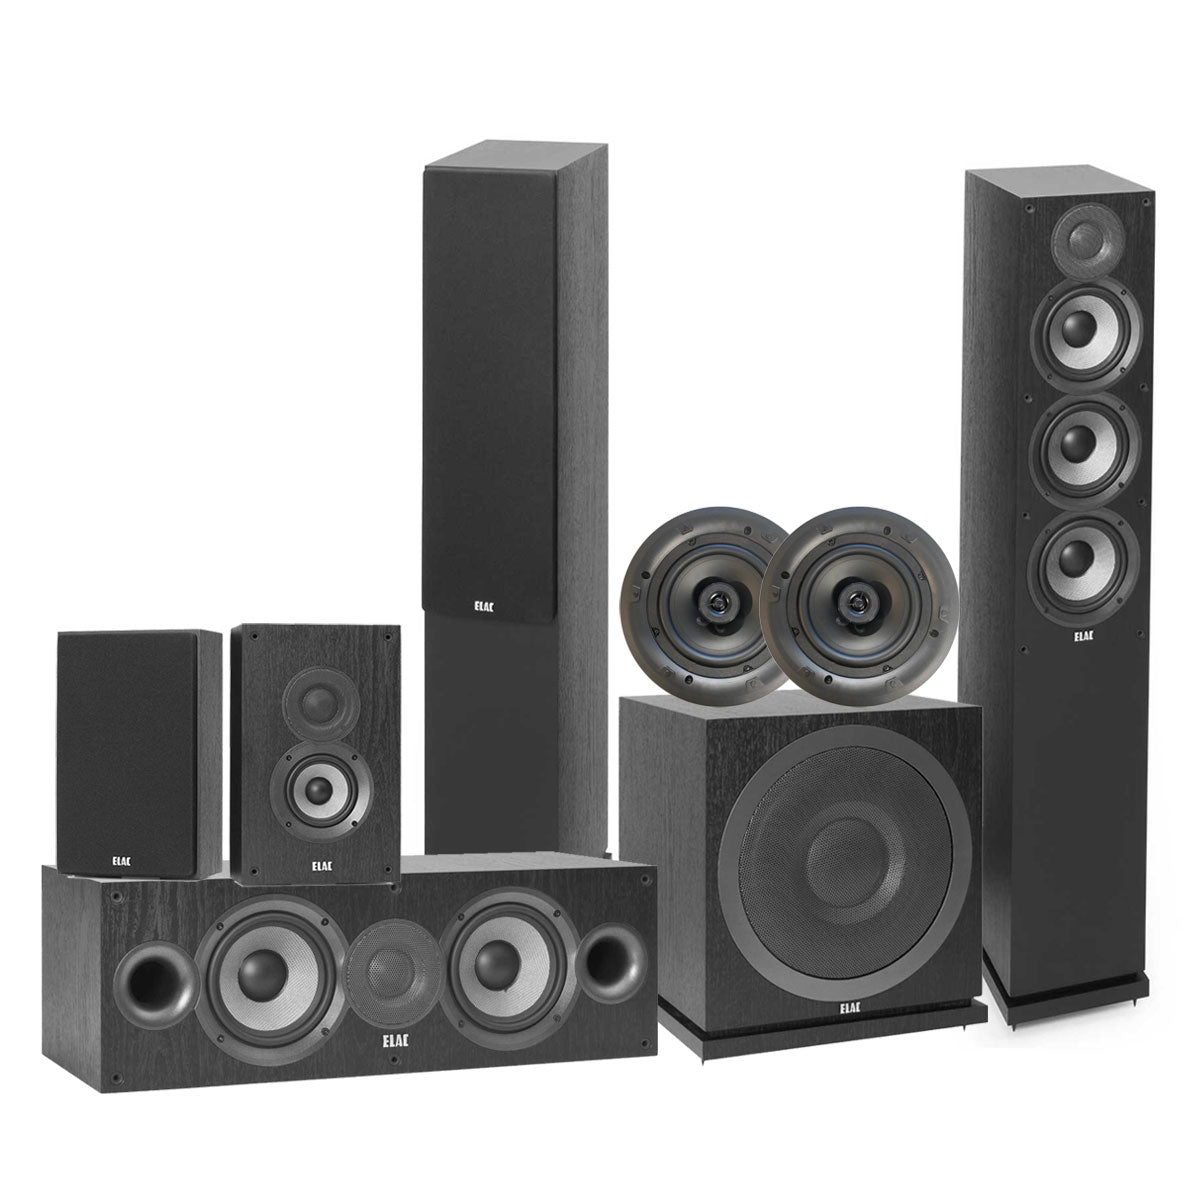 Elac 5.1.2 Dolby Atmos Package with F5.2 Towers, OWB4.2 Surrounds, C5.2 Center, IC-C61-W Ceiling Speakers and 3010 Subwoofer